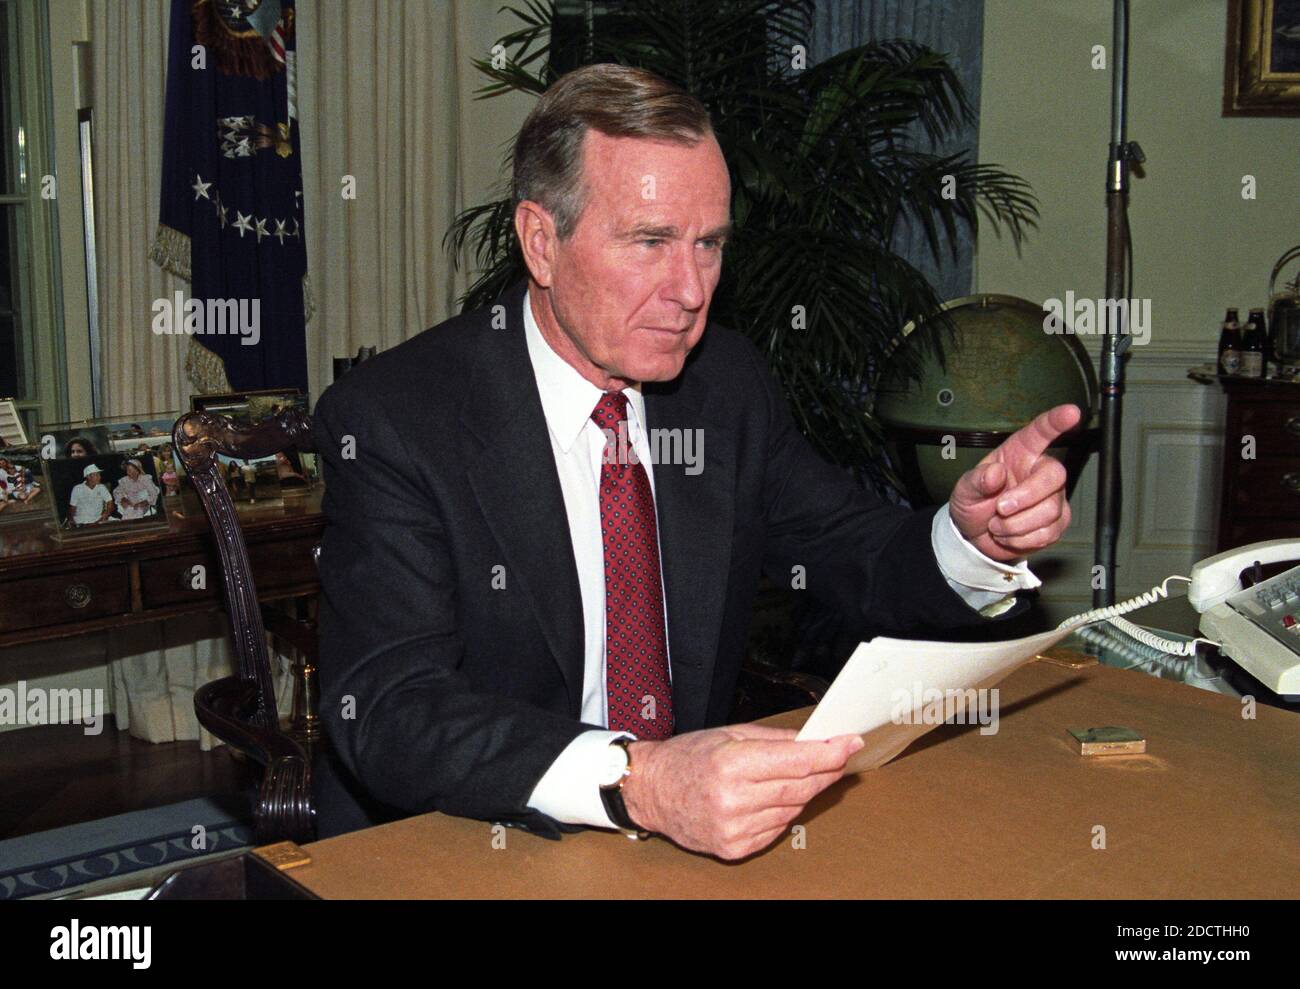 United States President George H.W. Bush poses for photographers after delivering an address to the nation from the Oval Office of the White House in Washington, DC on Christmas Day, December 25, 1991 announcing the resignation of President Mikhail Gorbachev as President of the Union of Soviet Socialist Republics, marking the collapse of the Soviet Union and the end of the Cold War. Photo by Arnie Sachs / CNP /ABACAPRESSC.OM Stock Photo